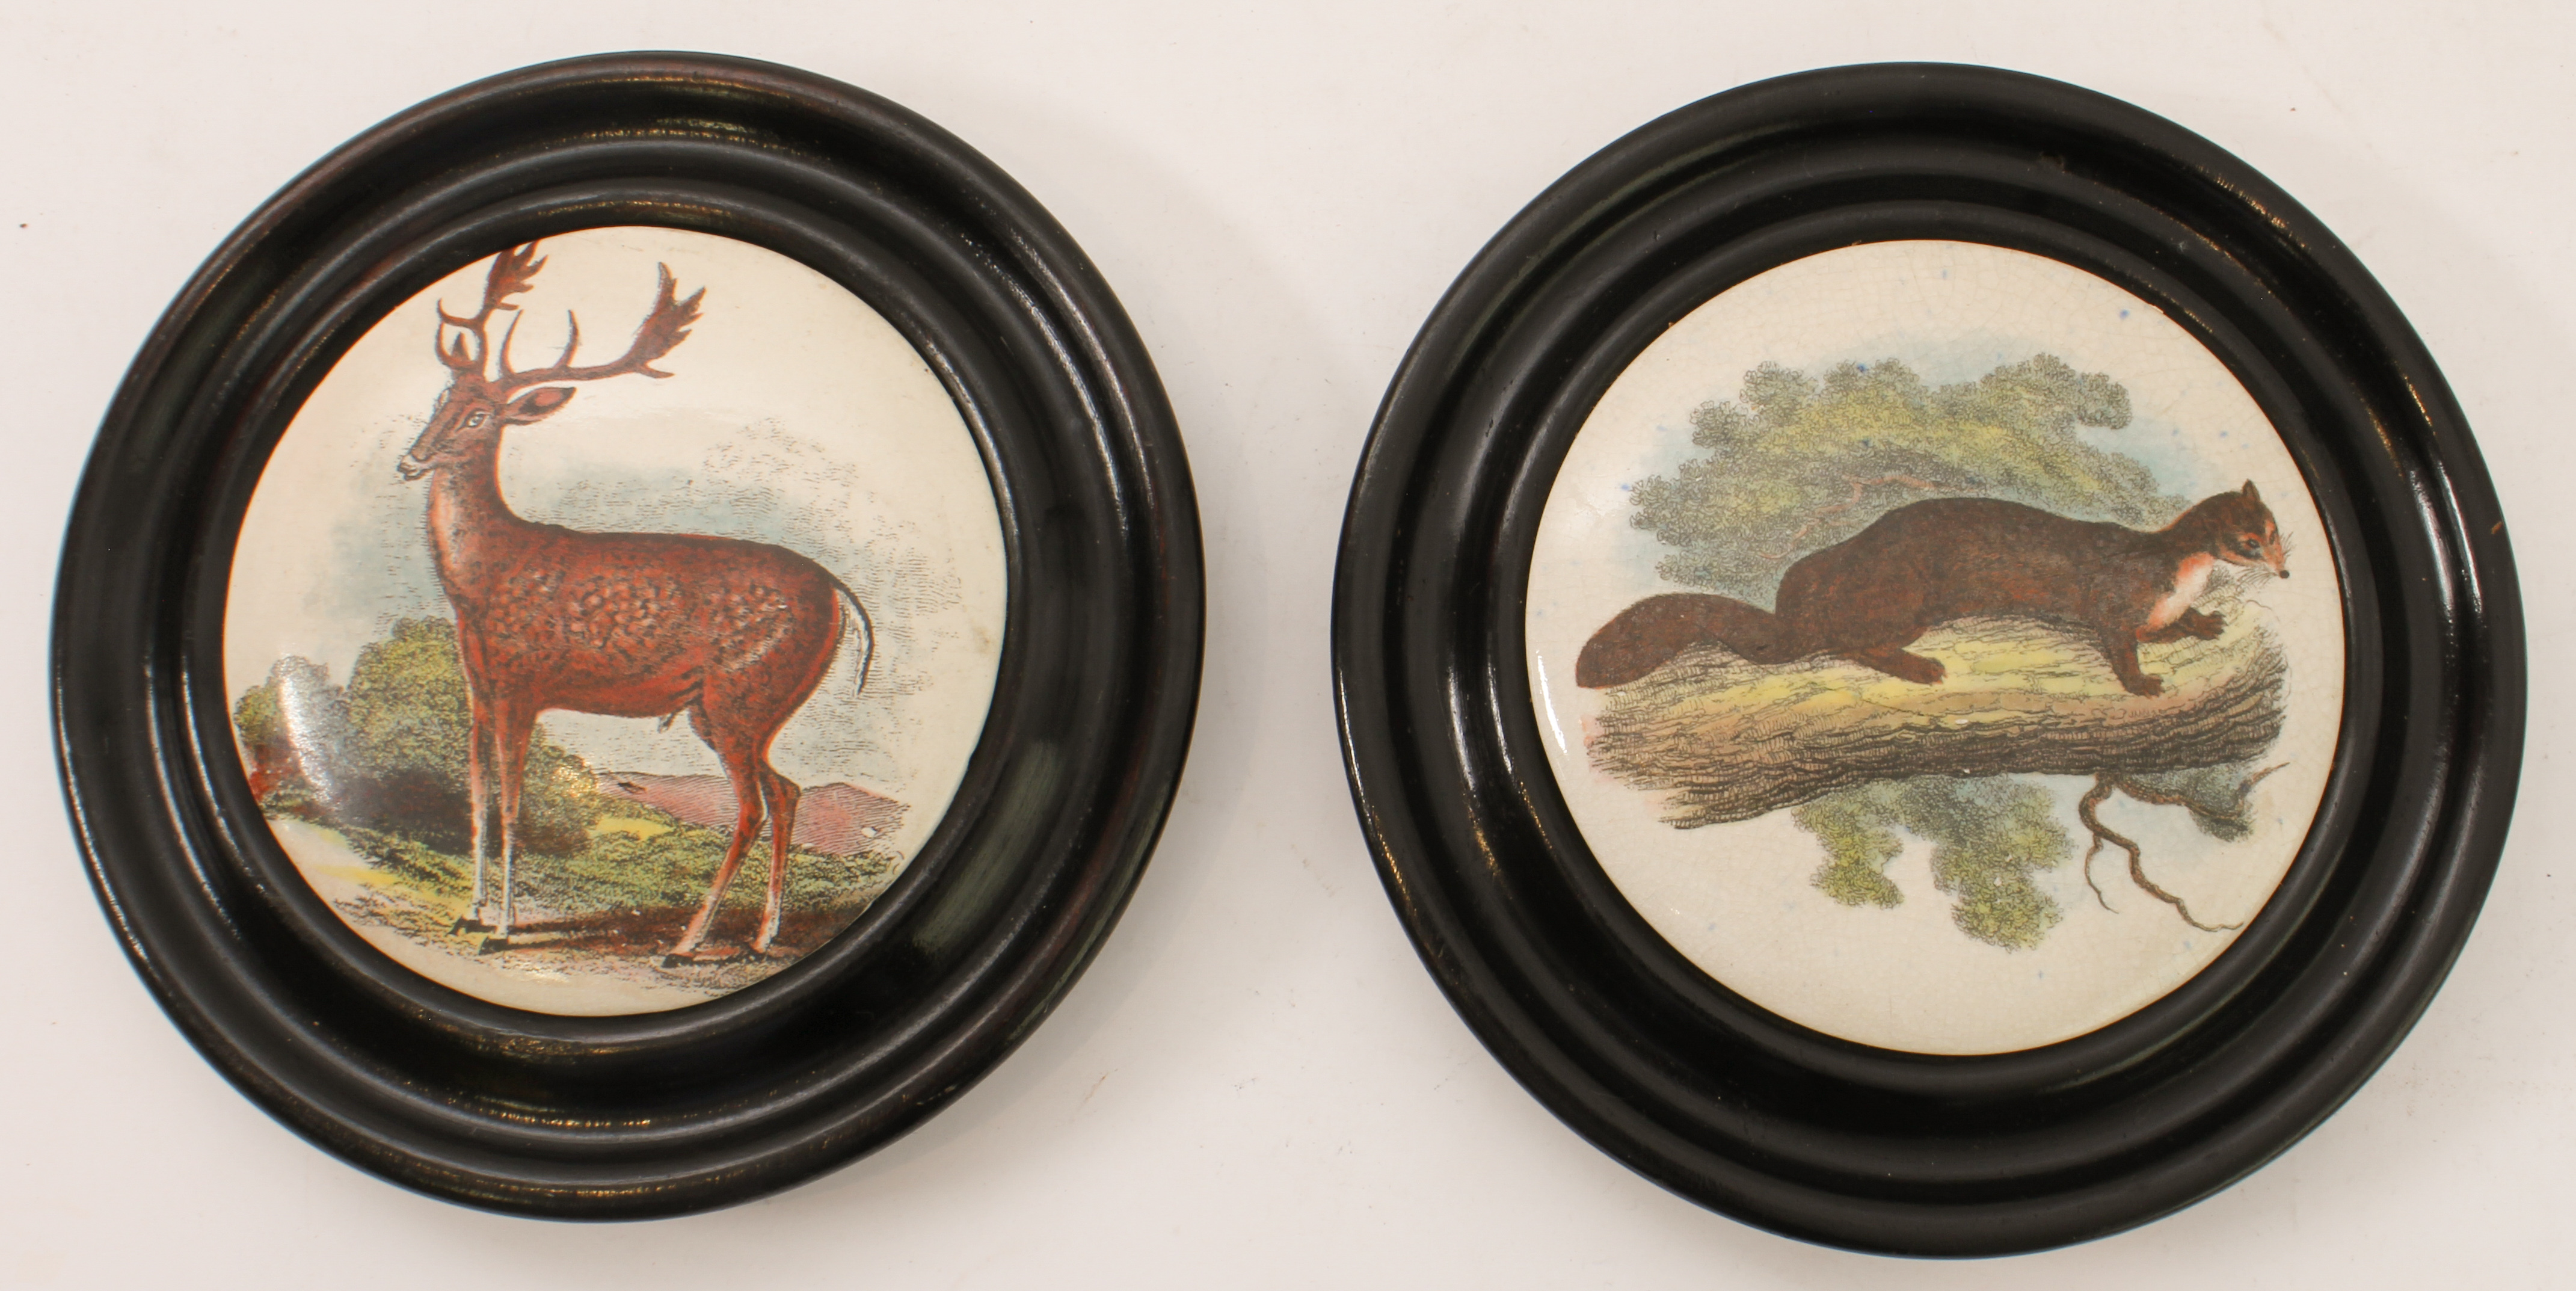 Nine late 19th to early 20th century ceramic pot lids: 1. six depicting various birds and animals, - Image 6 of 9